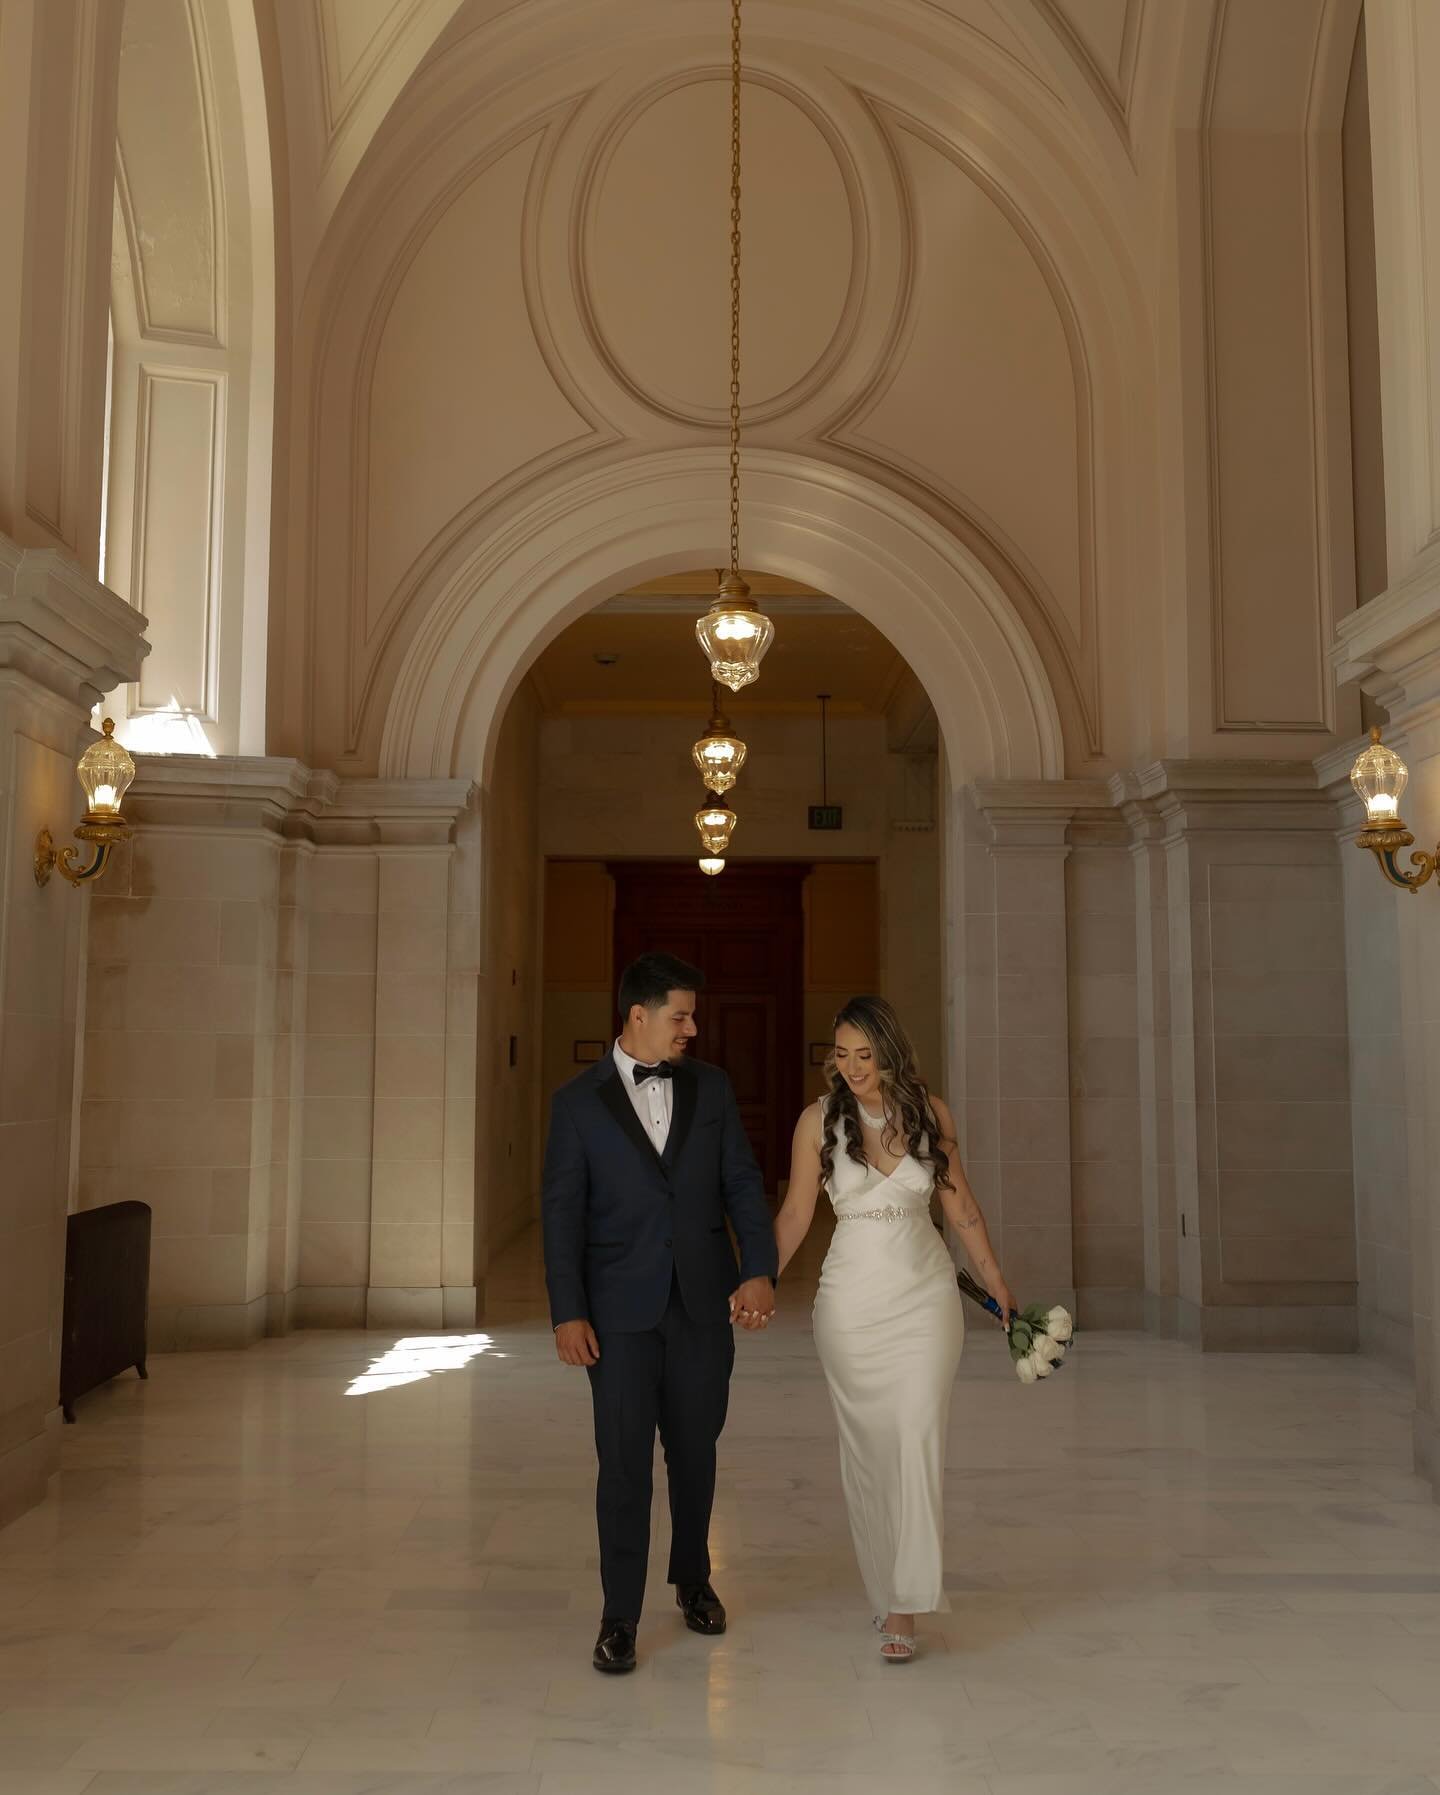 And just like that, MARRIED! ✨💍

Another lovely morning at the gorgeous SF City Hall. 
We will never get tired of this place and all the beautiful elopements we get to capture here.

Biggest congrats to P + T!!! 🤍

#minraephoto #sf #sanfrancisco #s